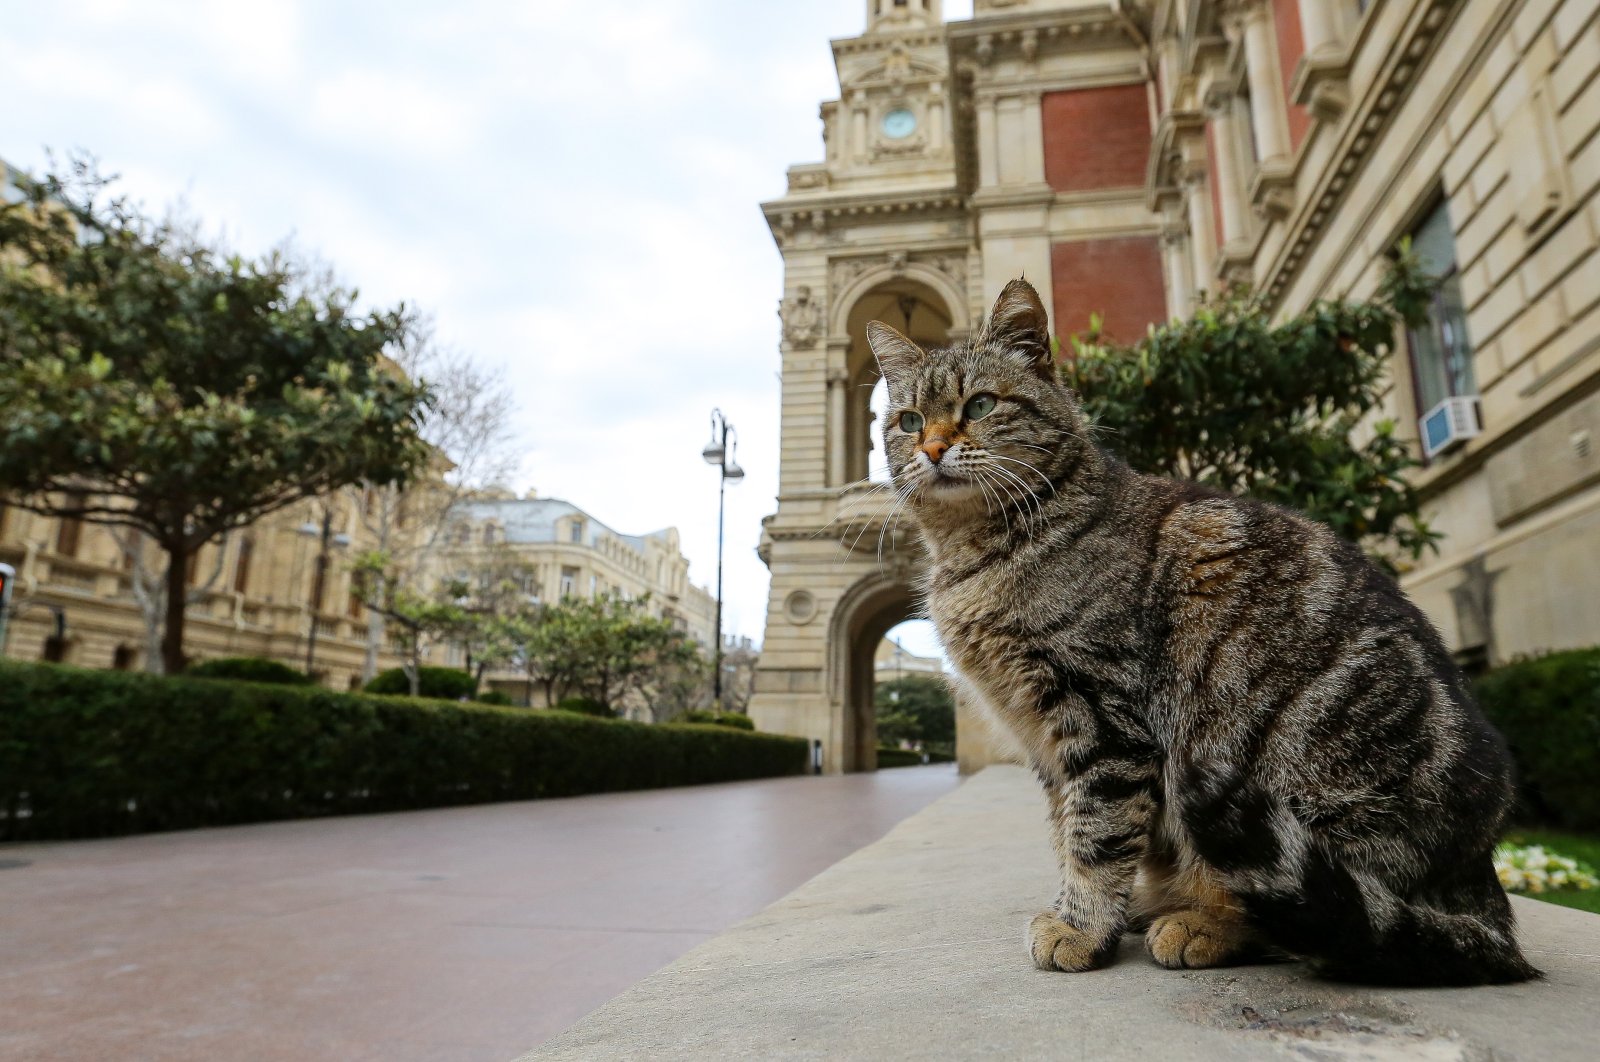 Cats on the streets of Baku, Azerbaijan, March 29, 2020. (Getty Images Photo)